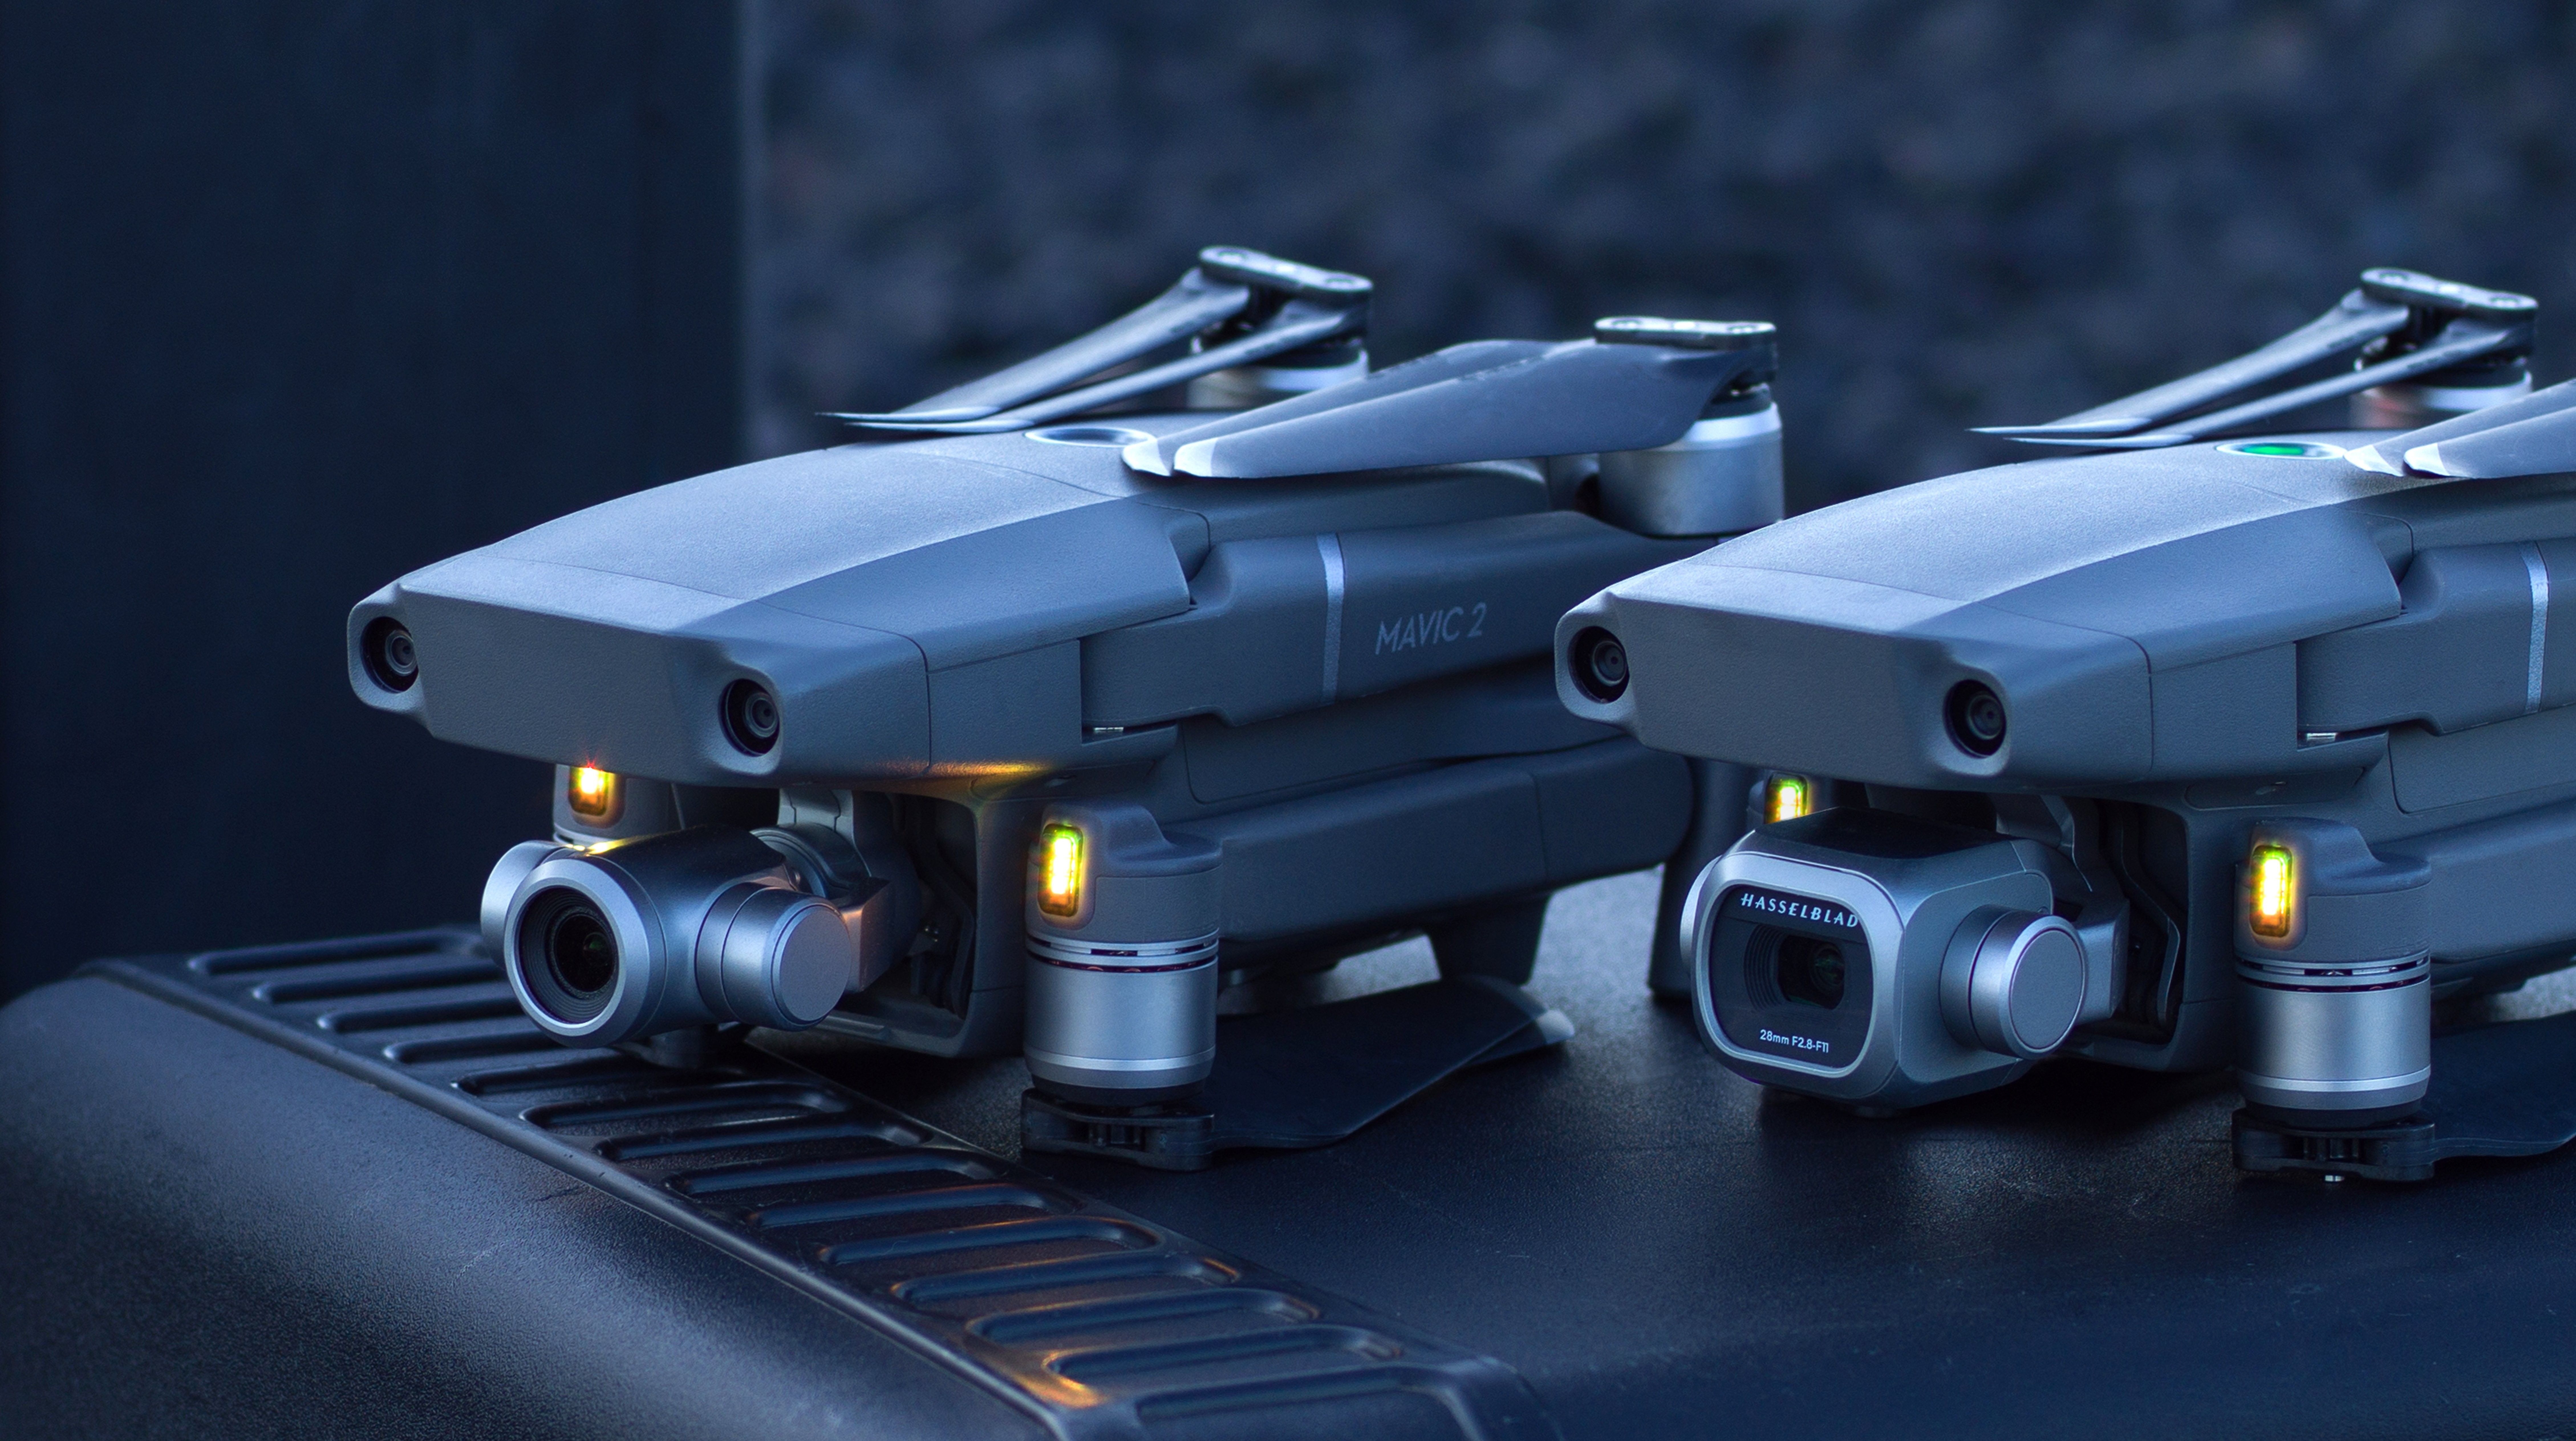 REVIEW: DJI's Mavic 2 Pro and Mavic 2 Zoom Are Almost Identical—So Which  One is Right for You?